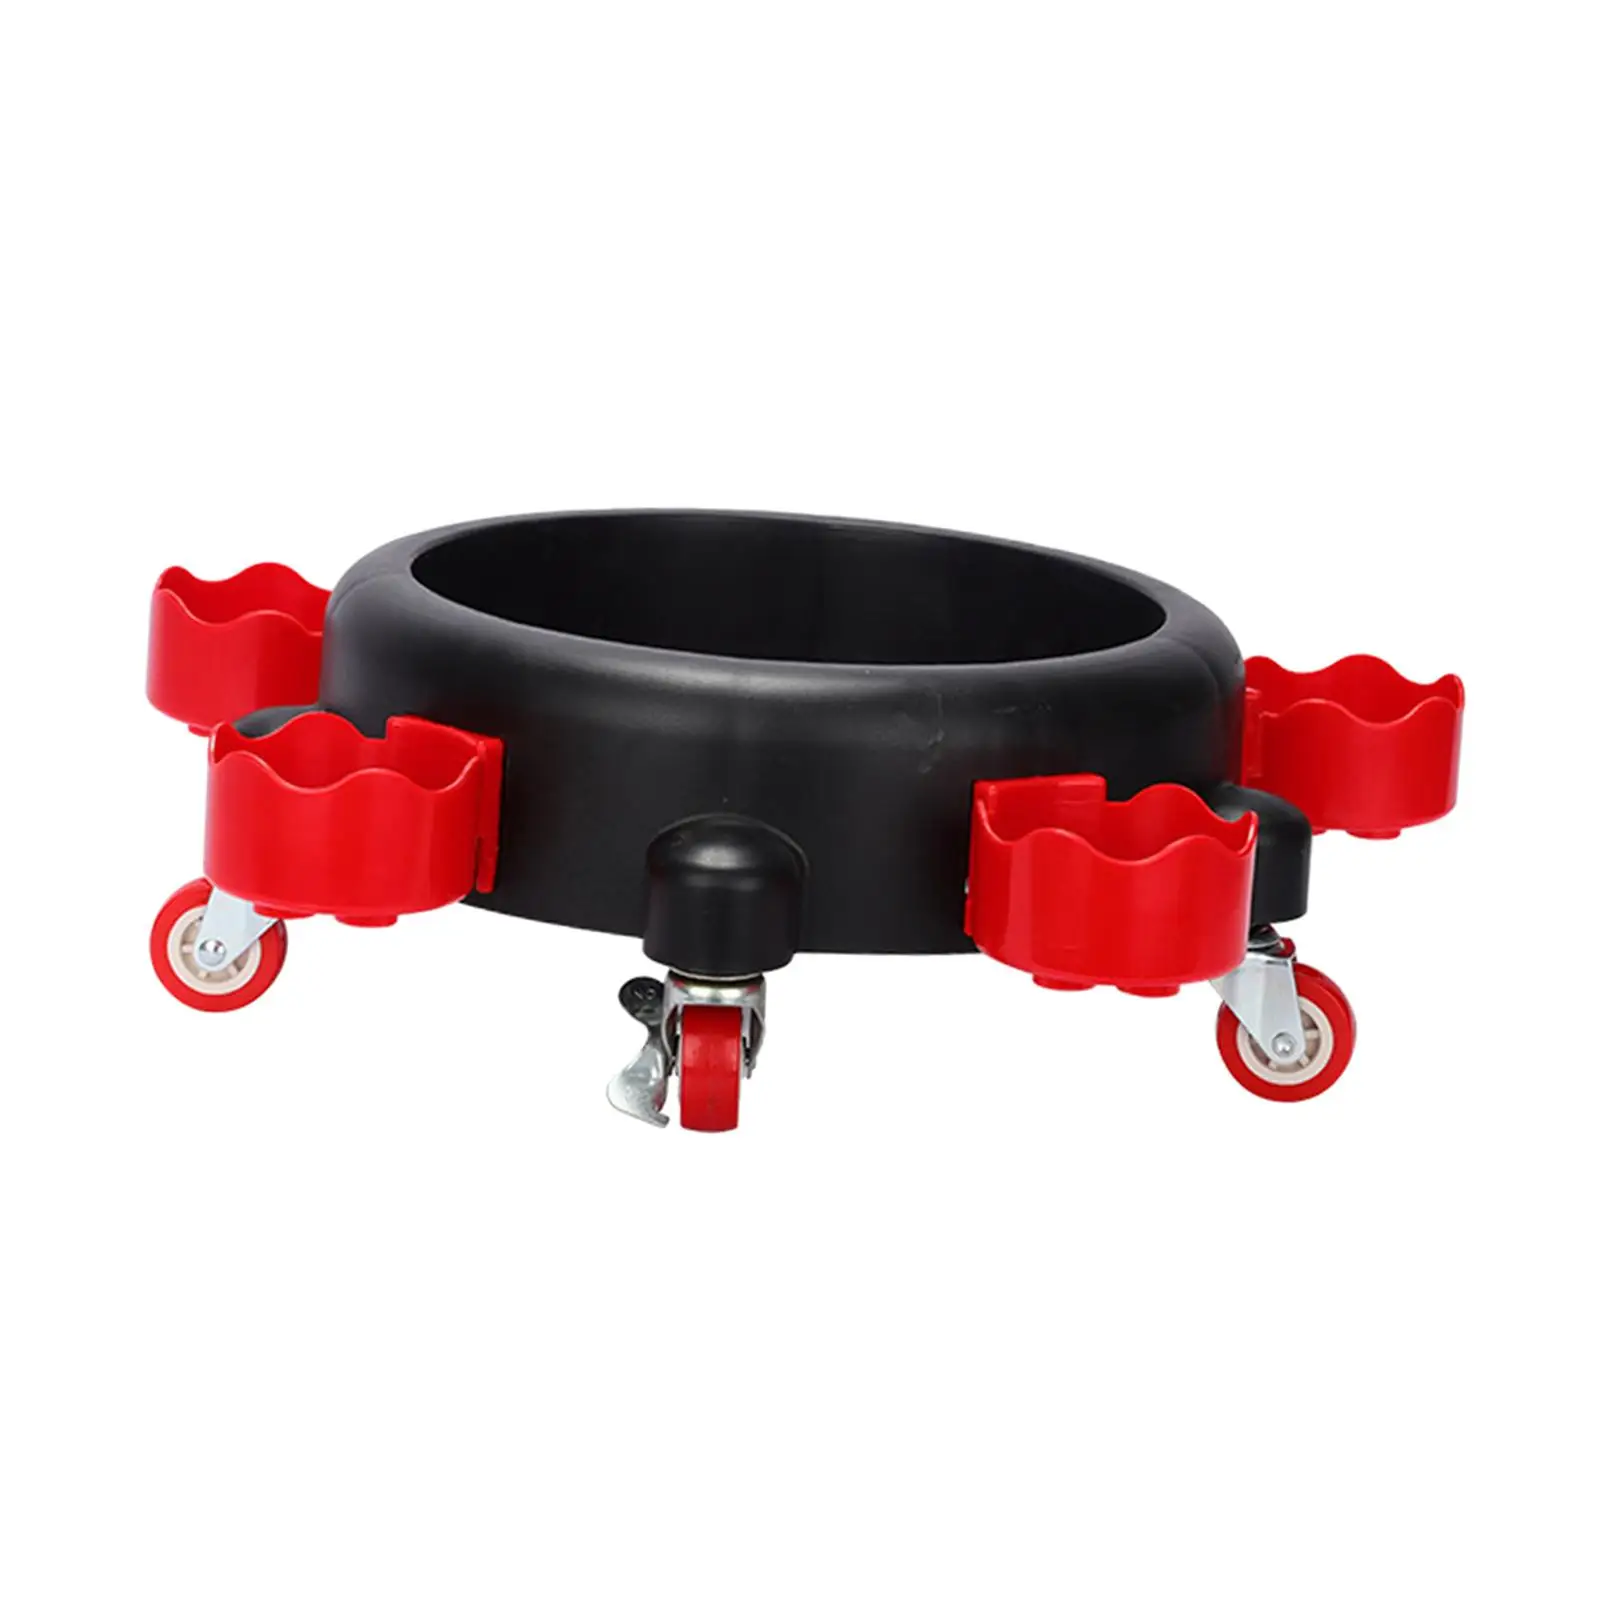 Rolling Bucket Dolly Car Wash Bucket Insert for Car Washing Cleaners